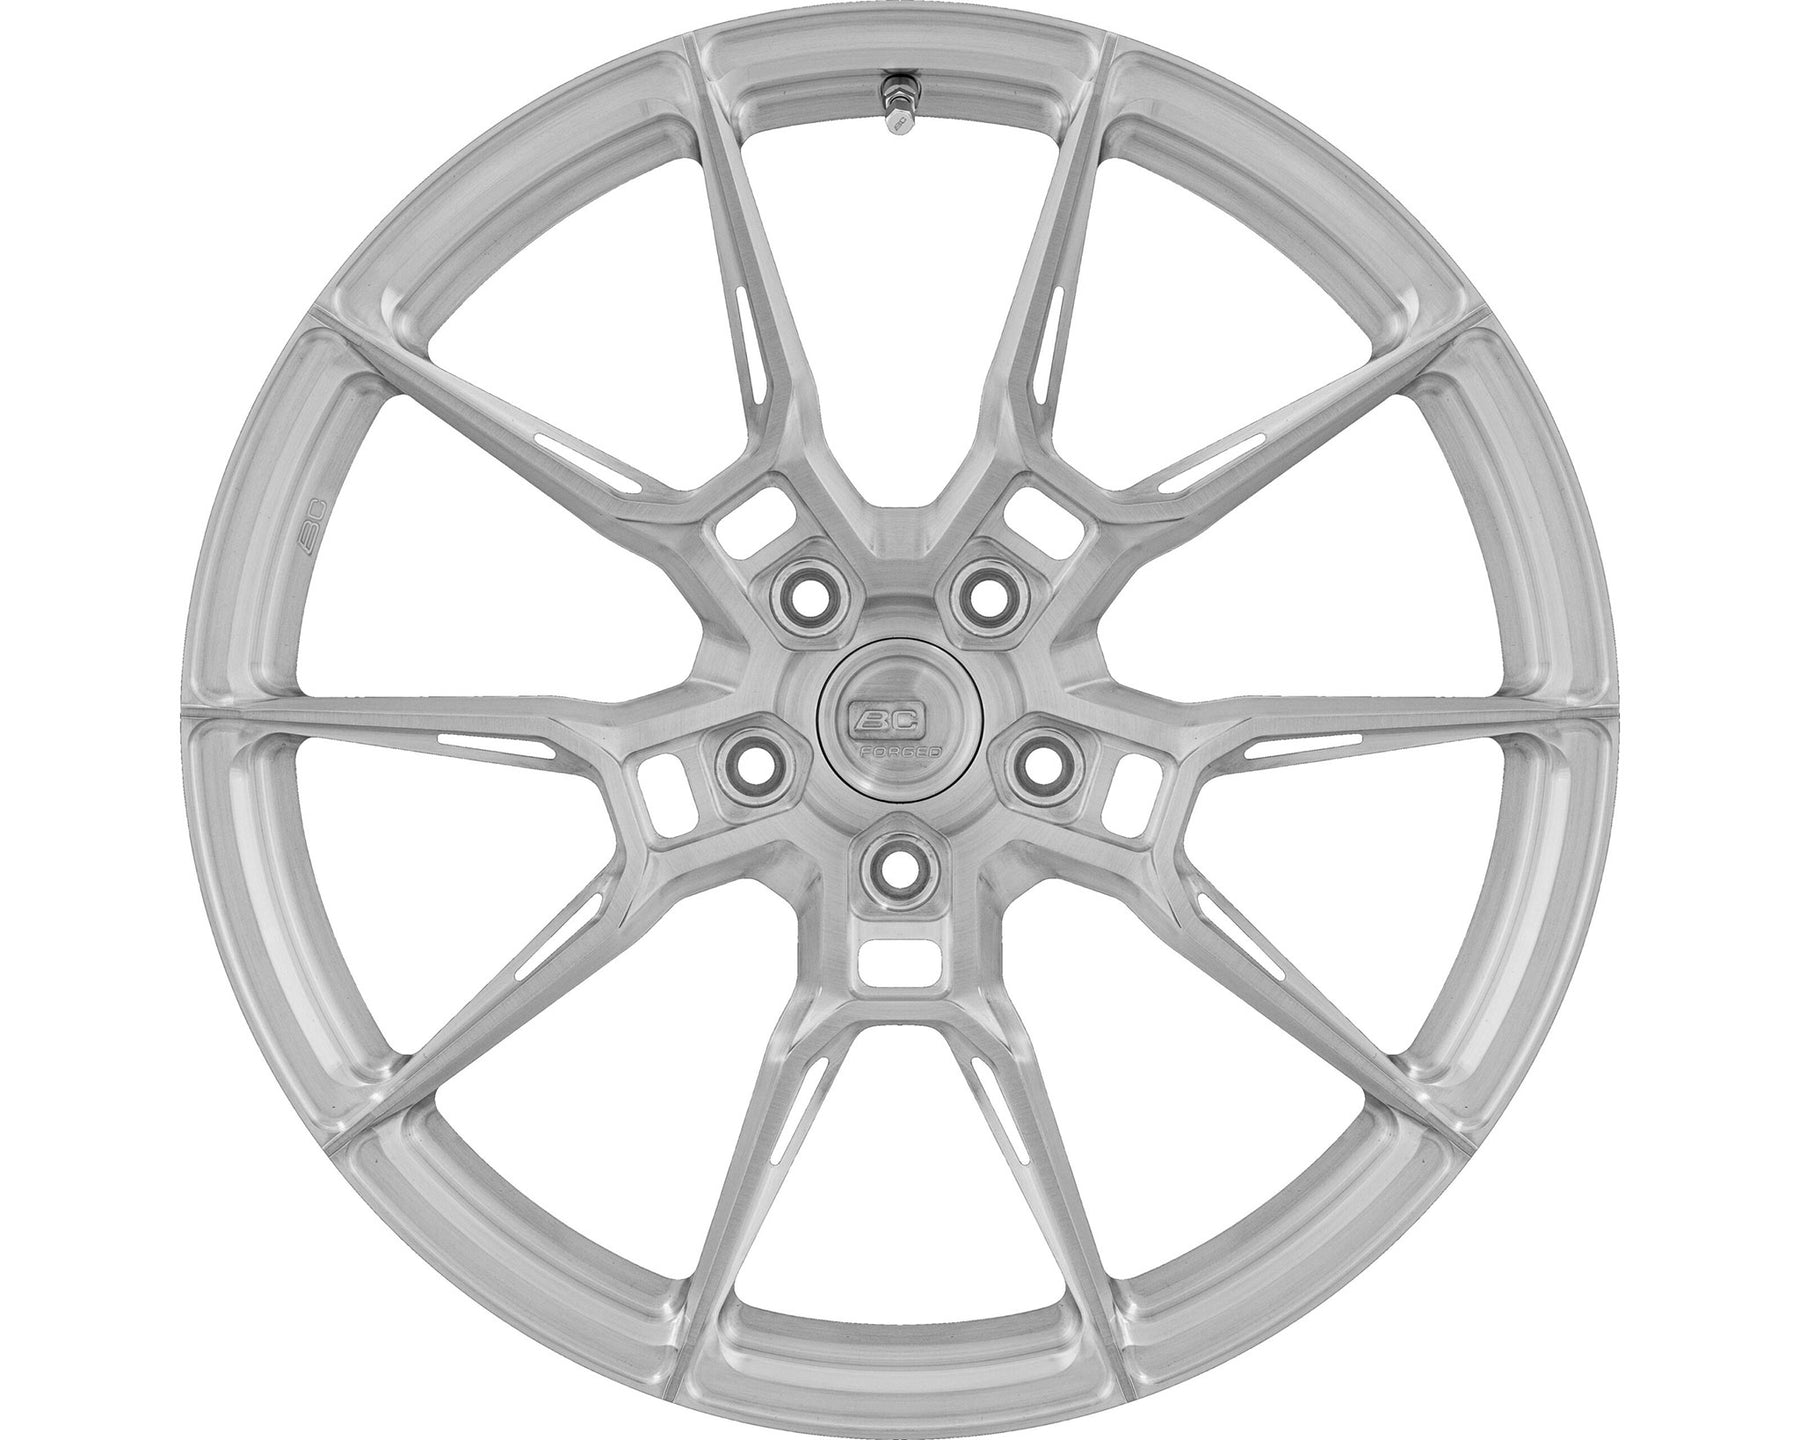 bc forged eh674 front view clear brushed finish